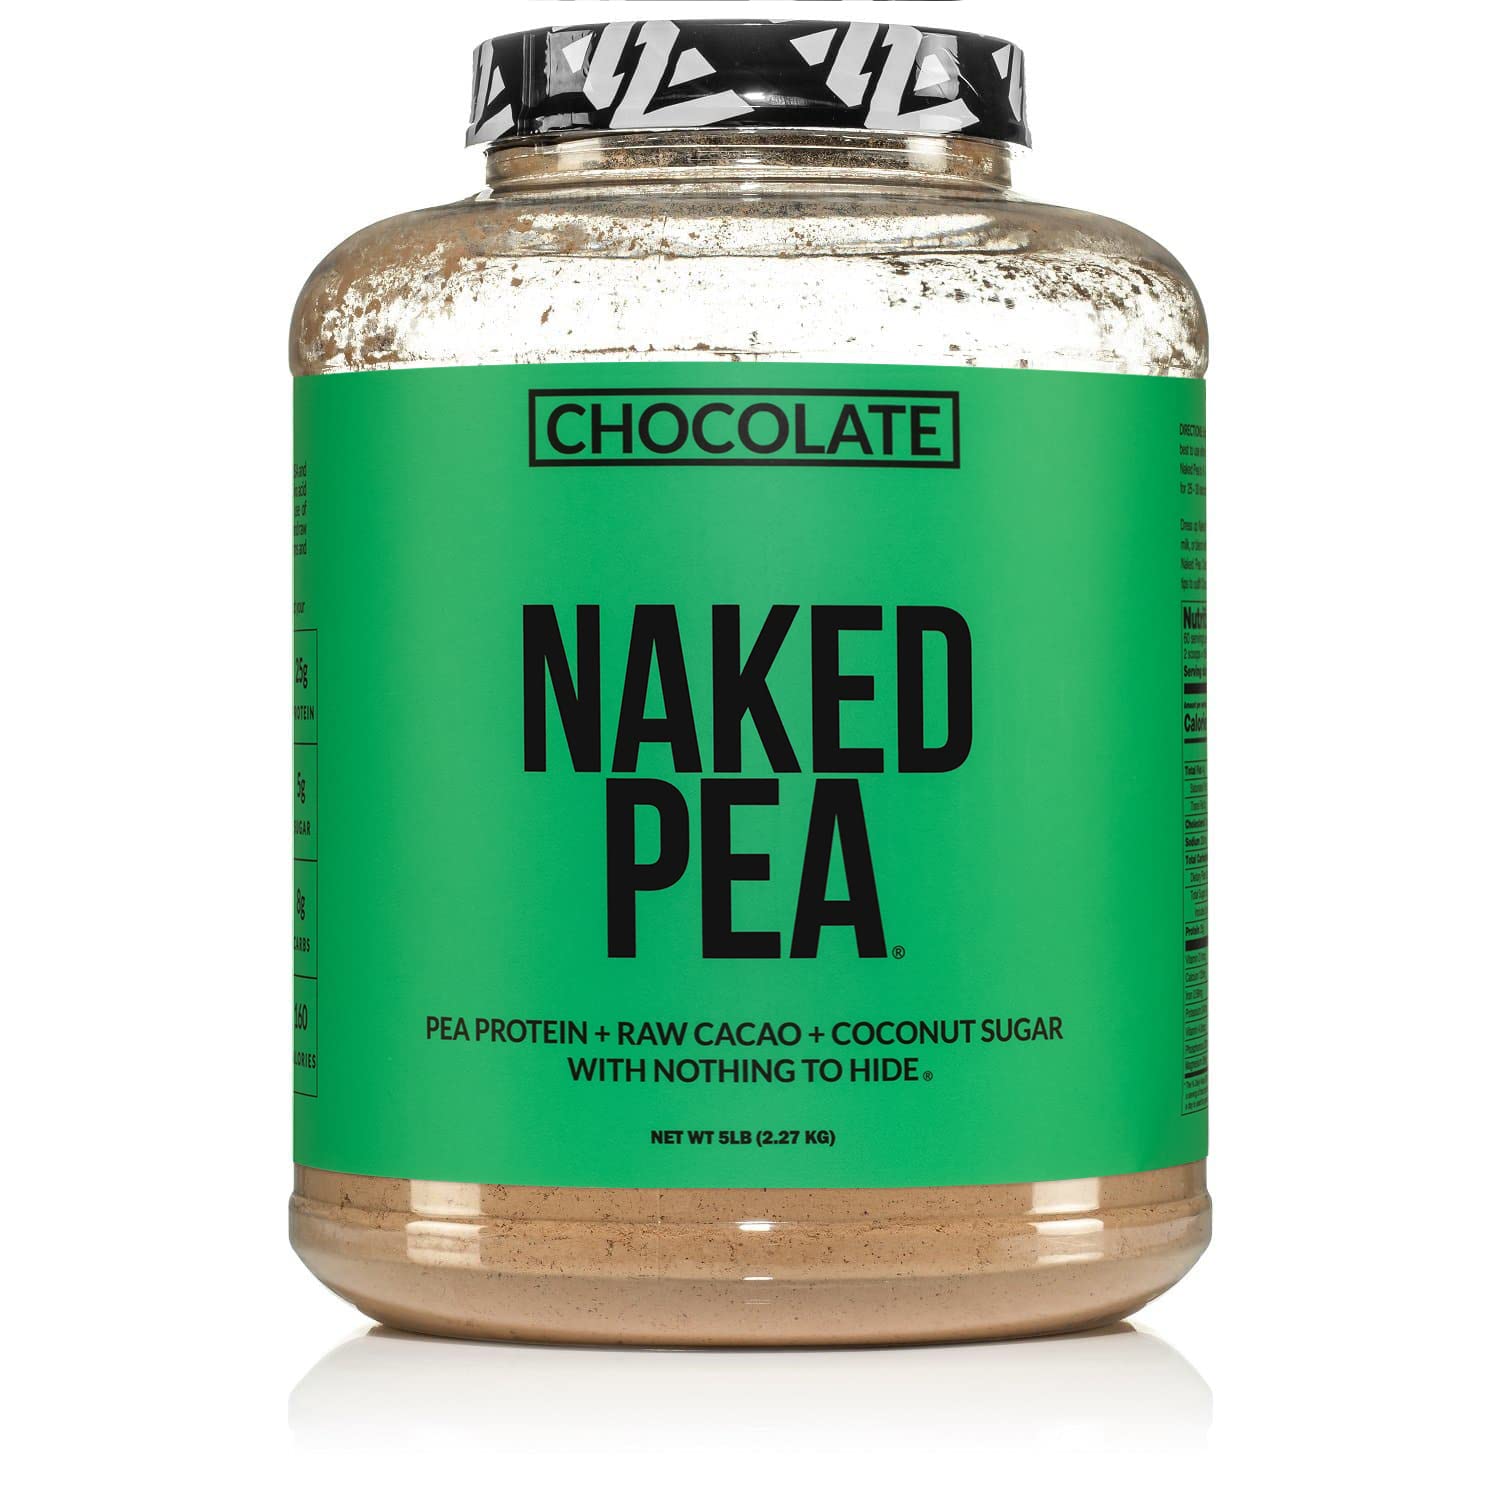 Book Cover LESS NAKED PEA - CHOCOLATE PEA PROTEIN - Pea Protein Isolate from North American Farms - 5lb Bulk, Plant Based, Vegetarian & Vegan Protein. Easy to Digest, Non-GMO, Gluten Free, Lactose Free, Soy Free